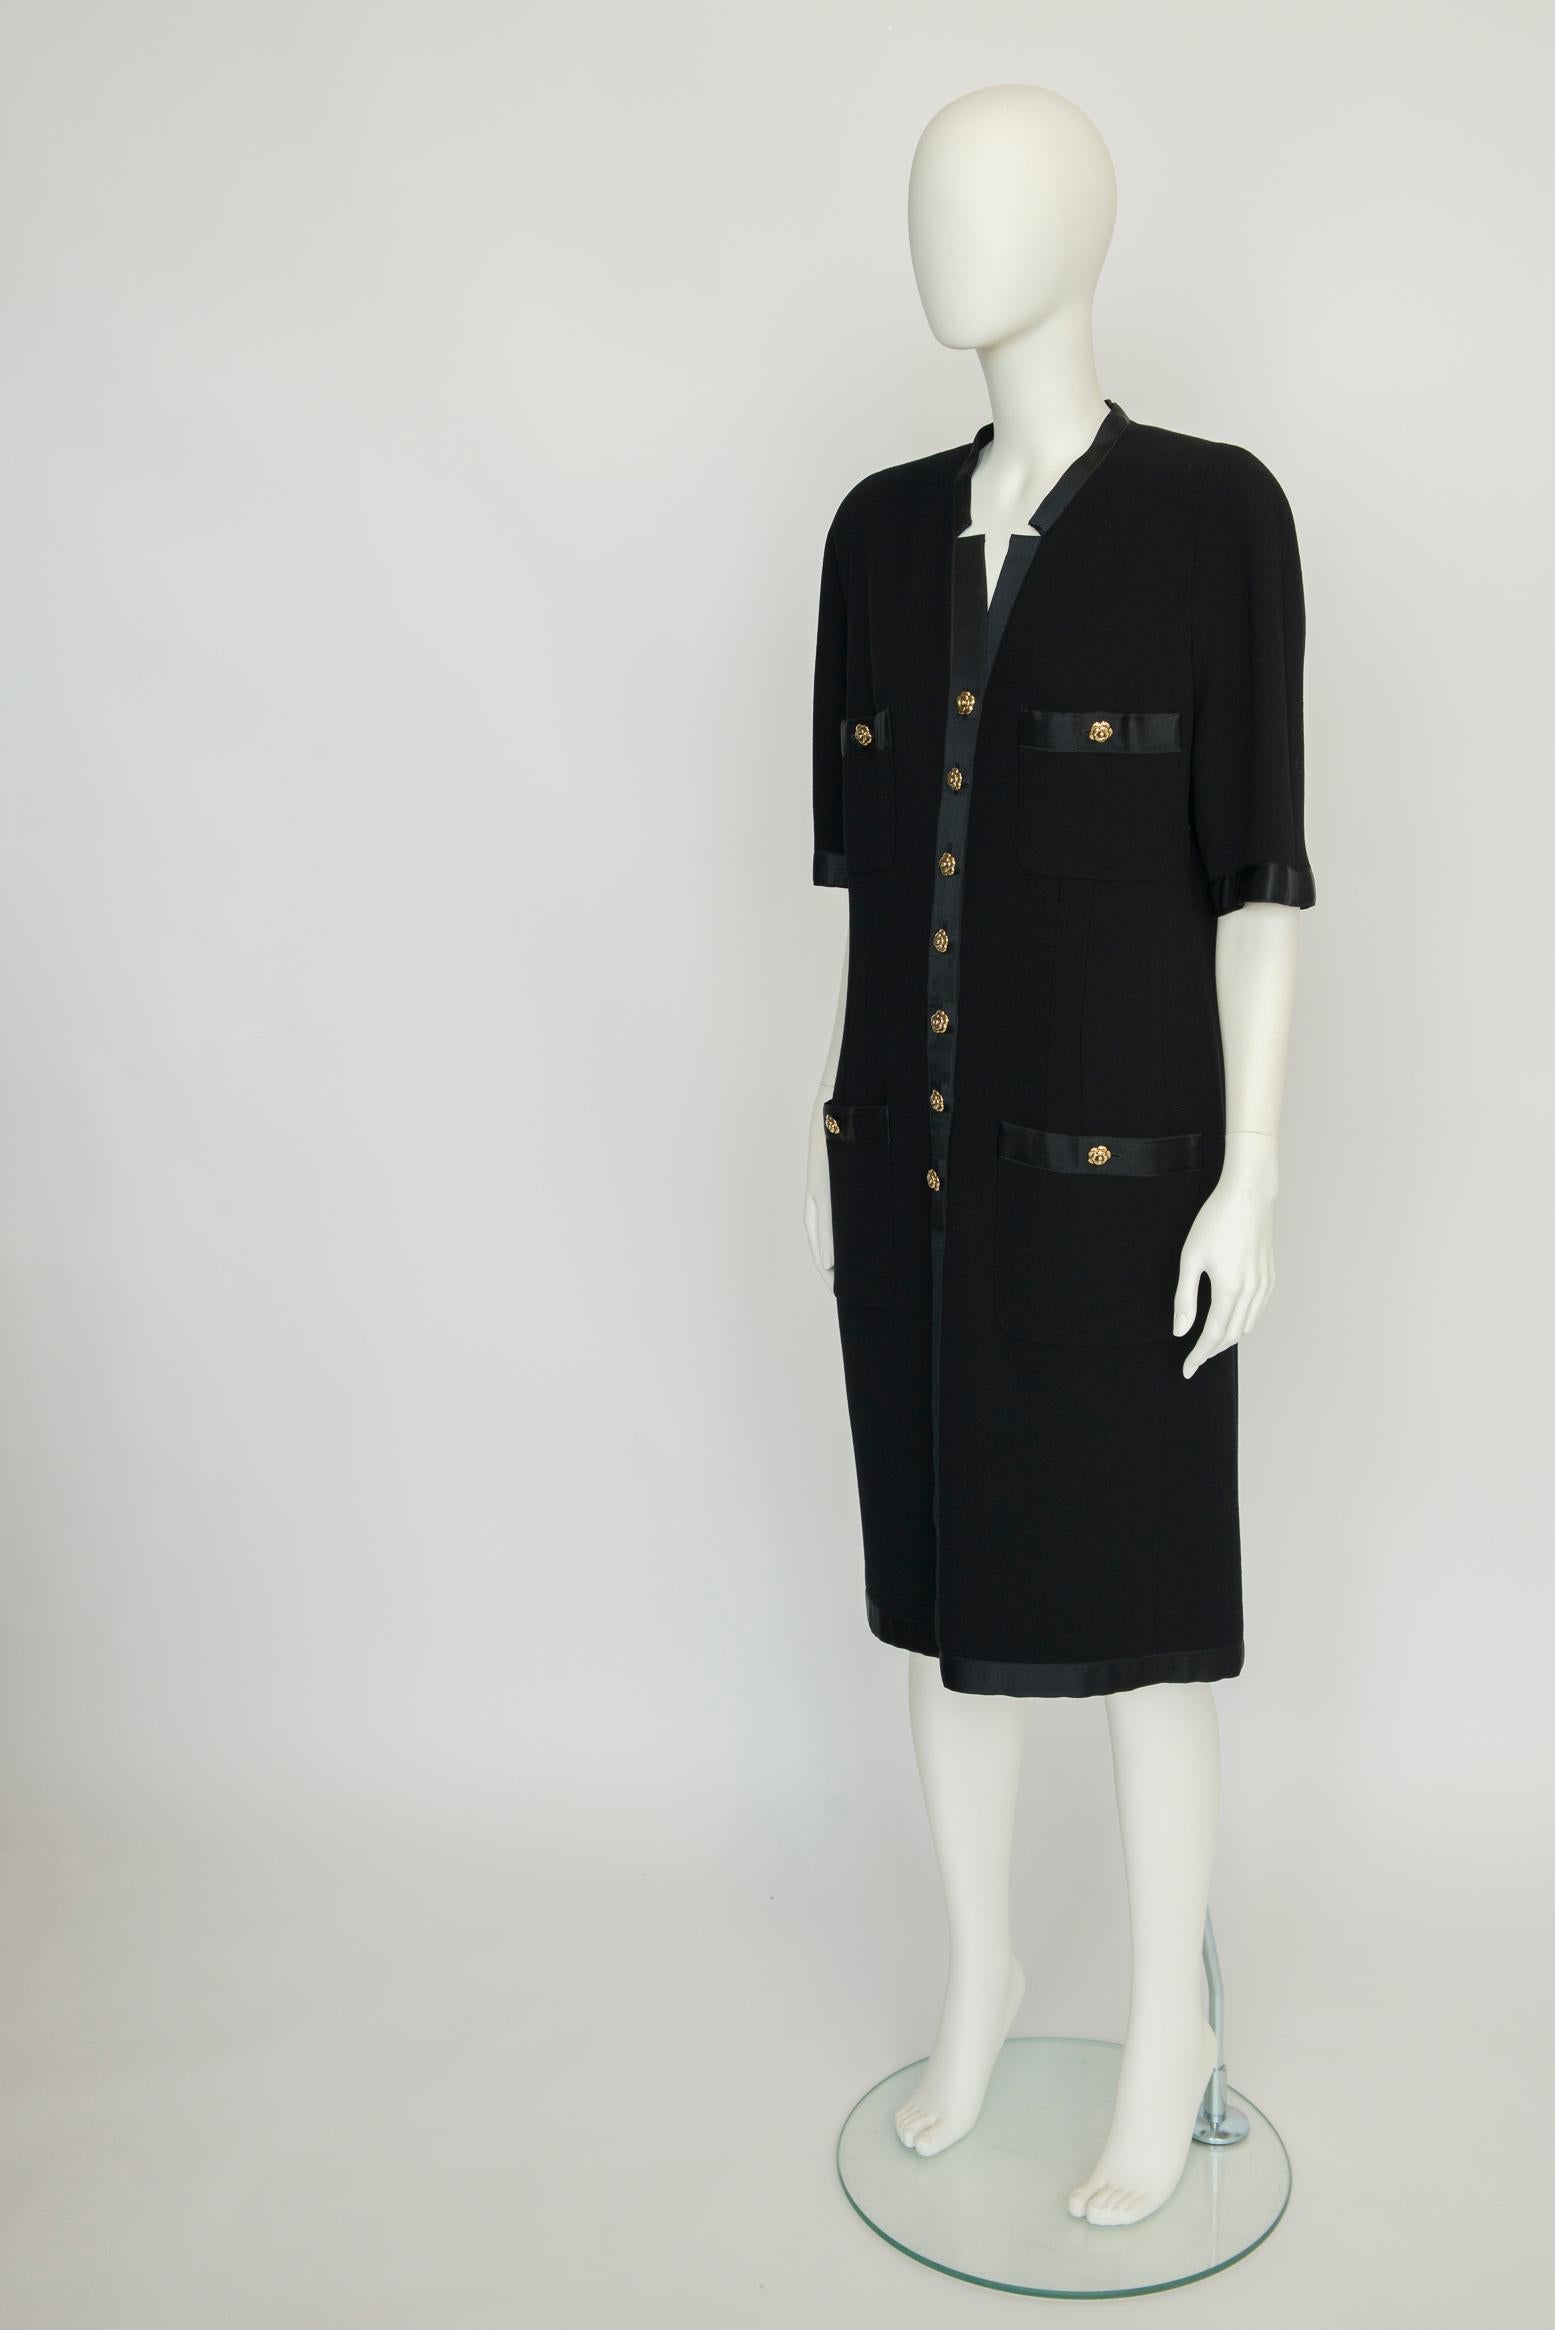 Chanel By Karl Lagerfeld Button-Embellished Little Black Dress, FW 1990-1991 In Good Condition For Sale In Geneva, CH